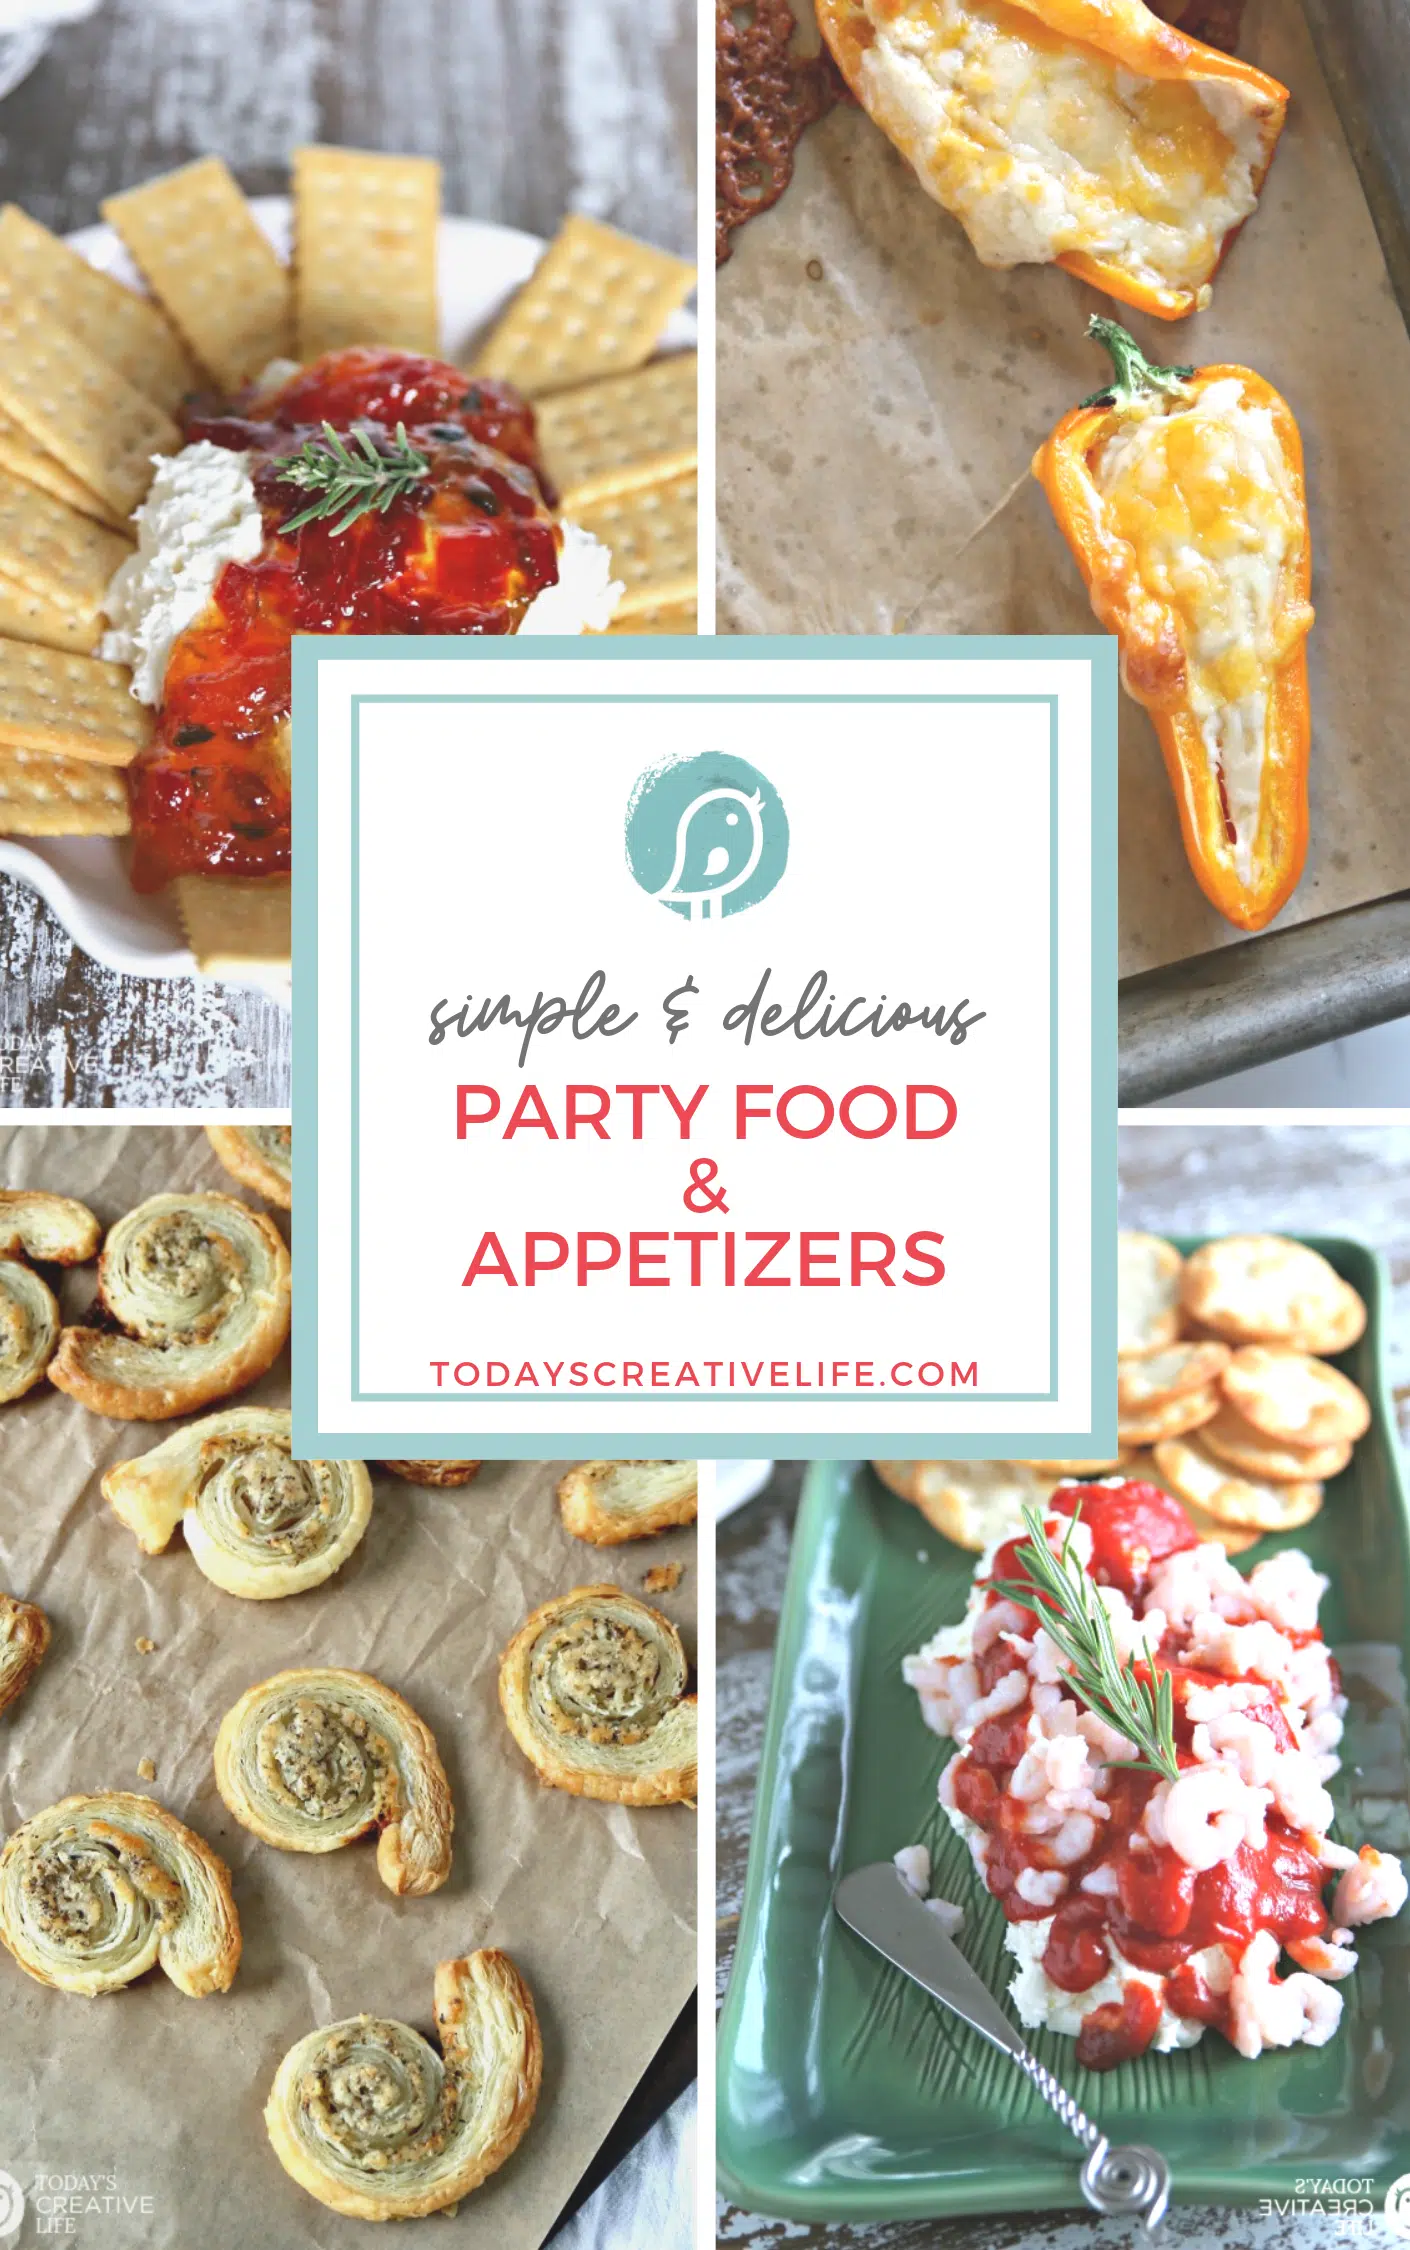 19 Party Food & Appetizers Recipe Book by Today's Creative Life